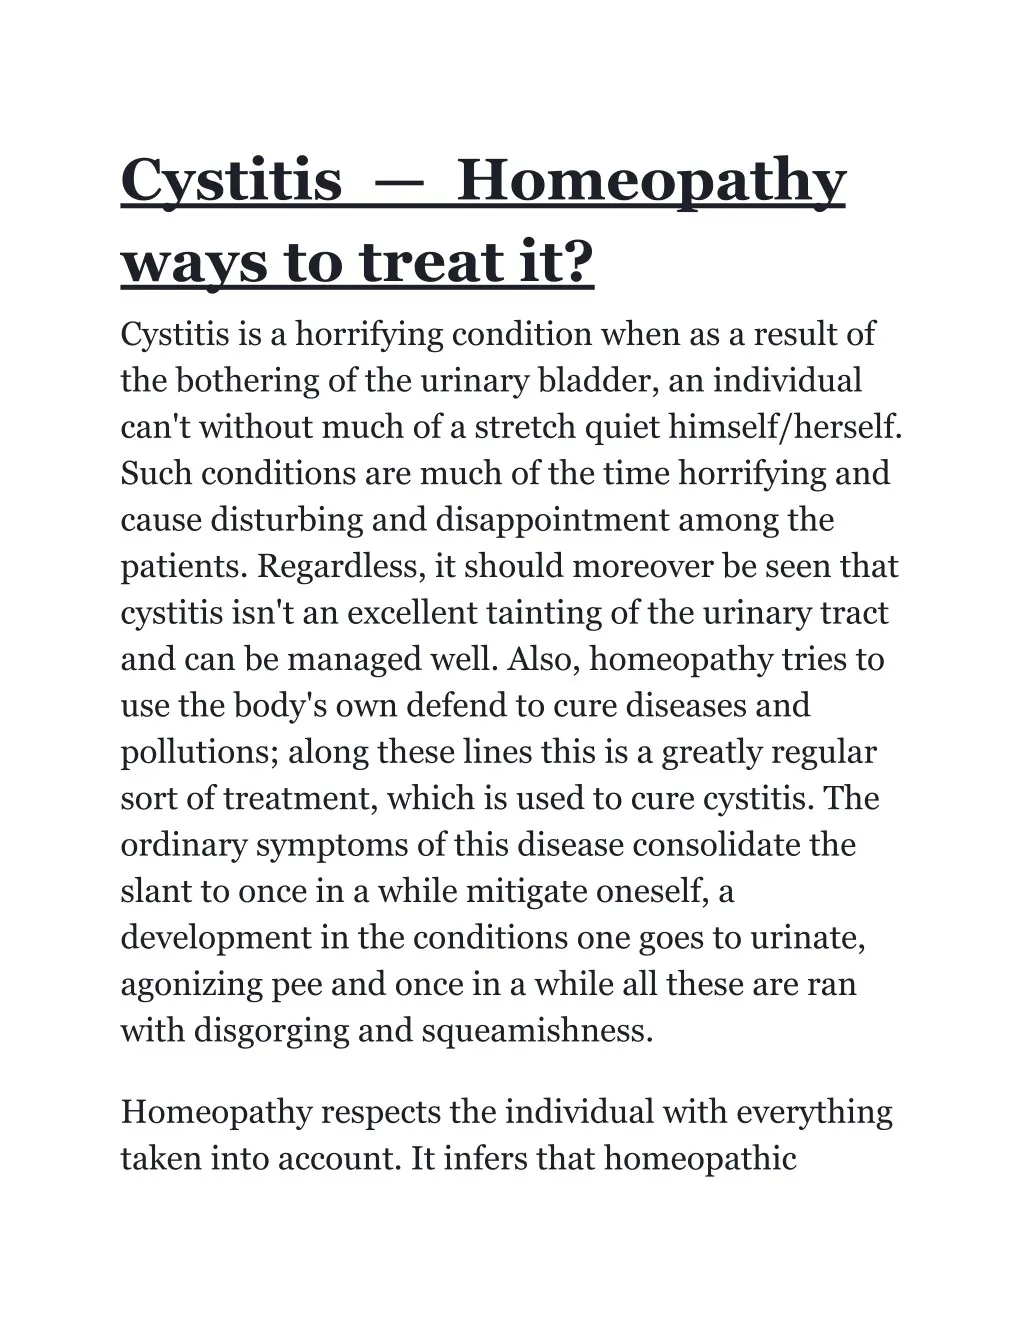 cystitis homeopathy ways to treat it